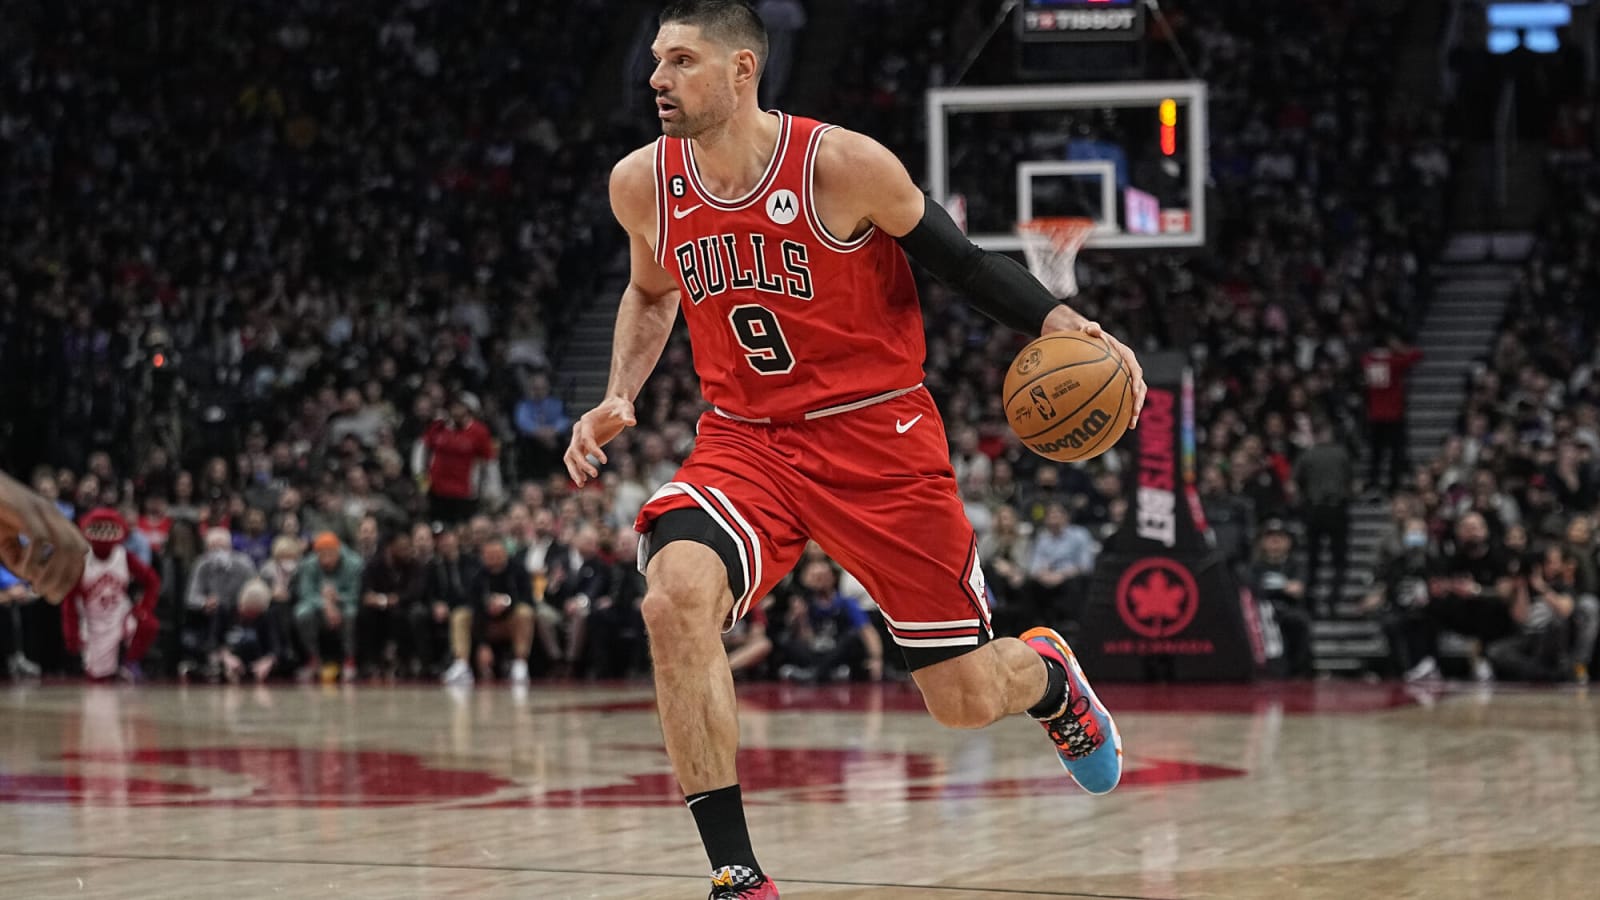 To Win or to Tank: What Should the Bulls Do?